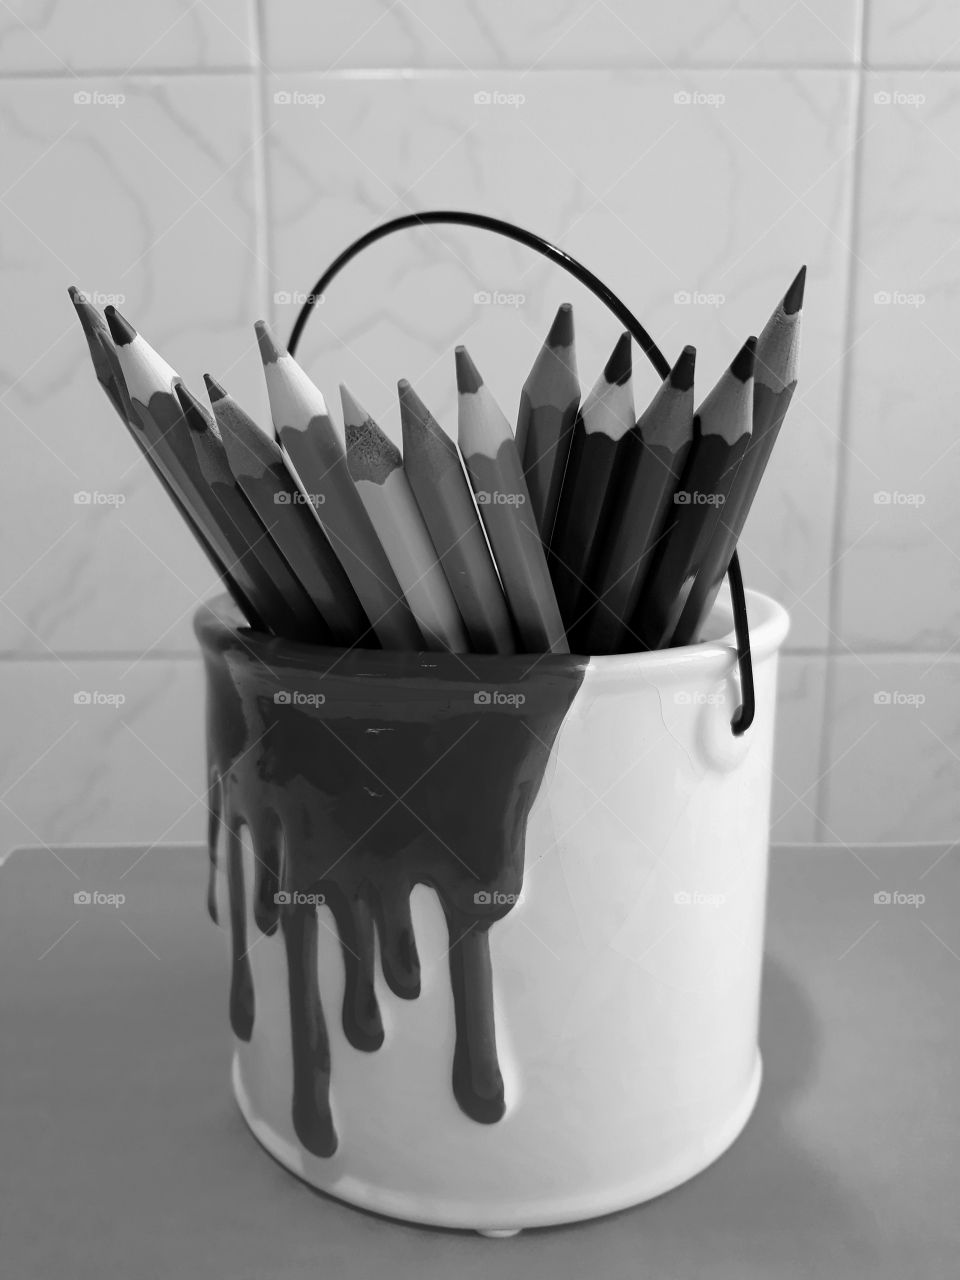 Colored pencils in a pencil holder